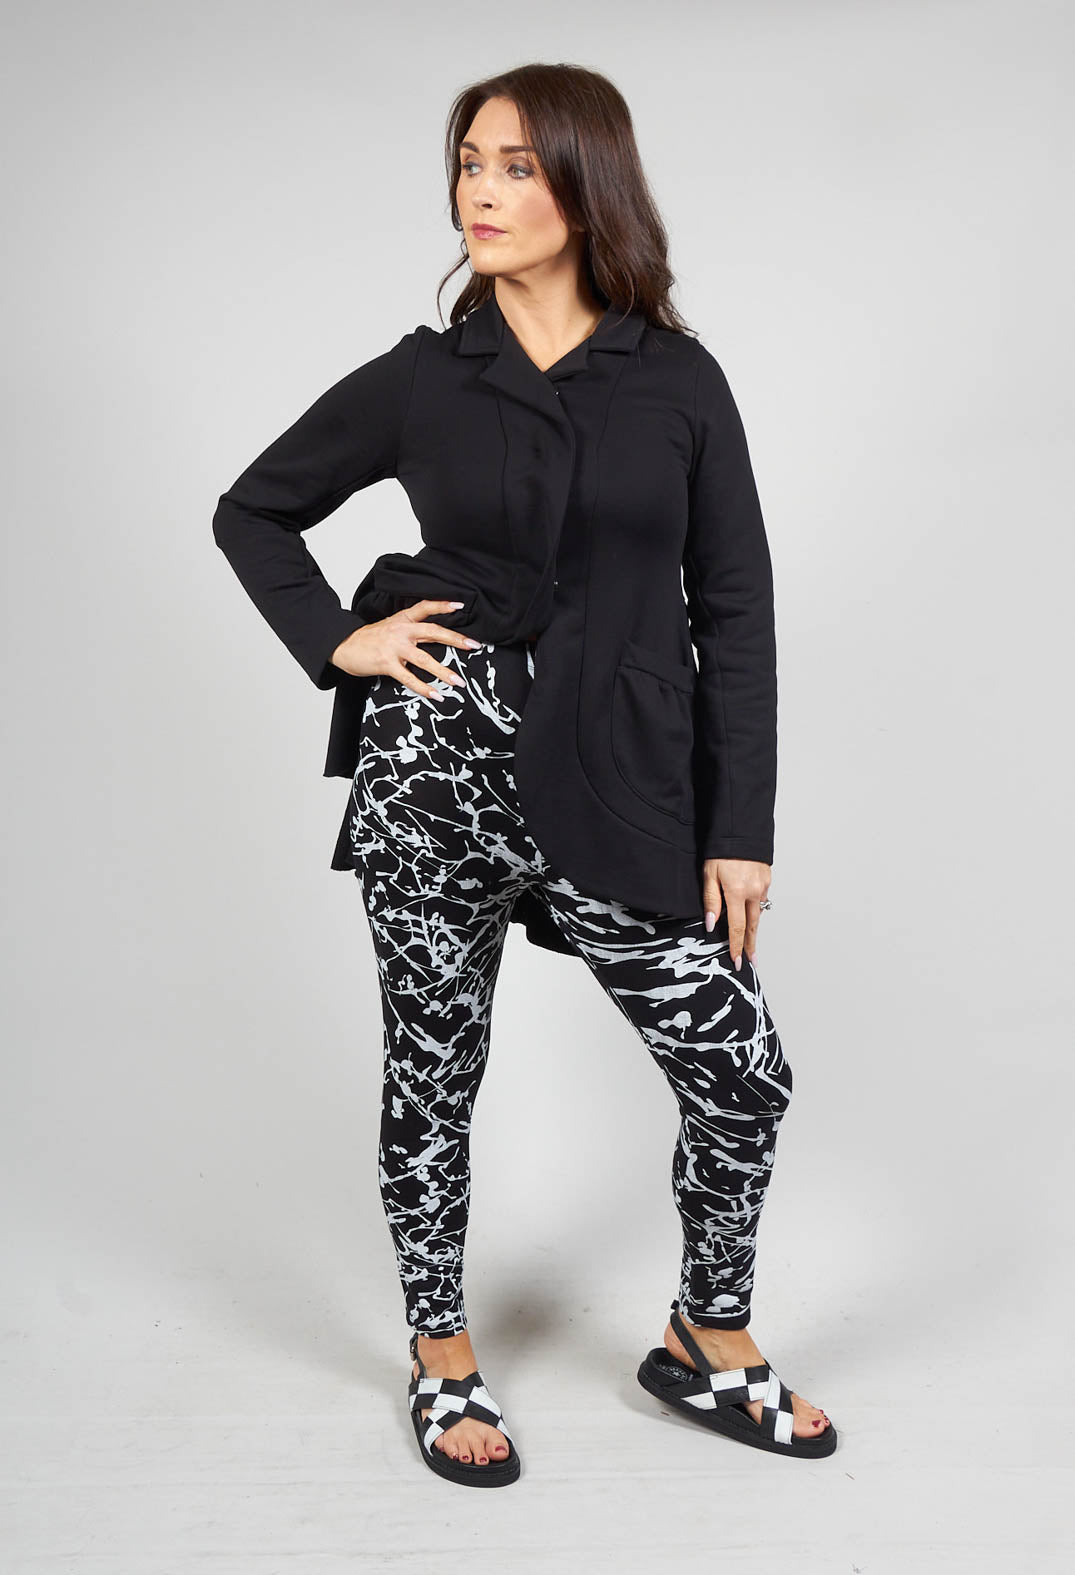 Ankle Cropped Leggings in Black with White Print